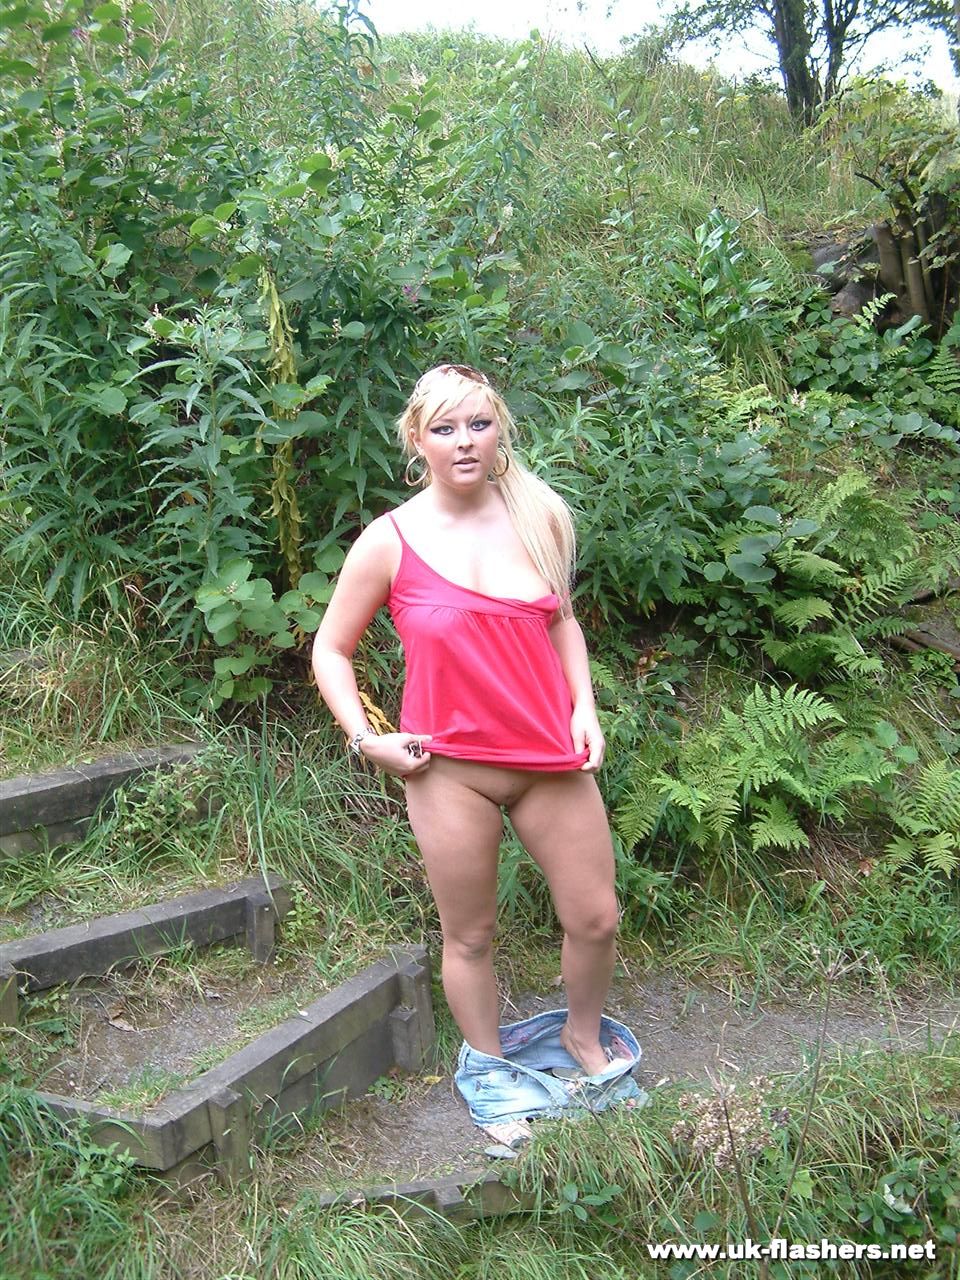 Overweight UK female with blonde hair strips naked on a popular walking trails foto porno #428197332